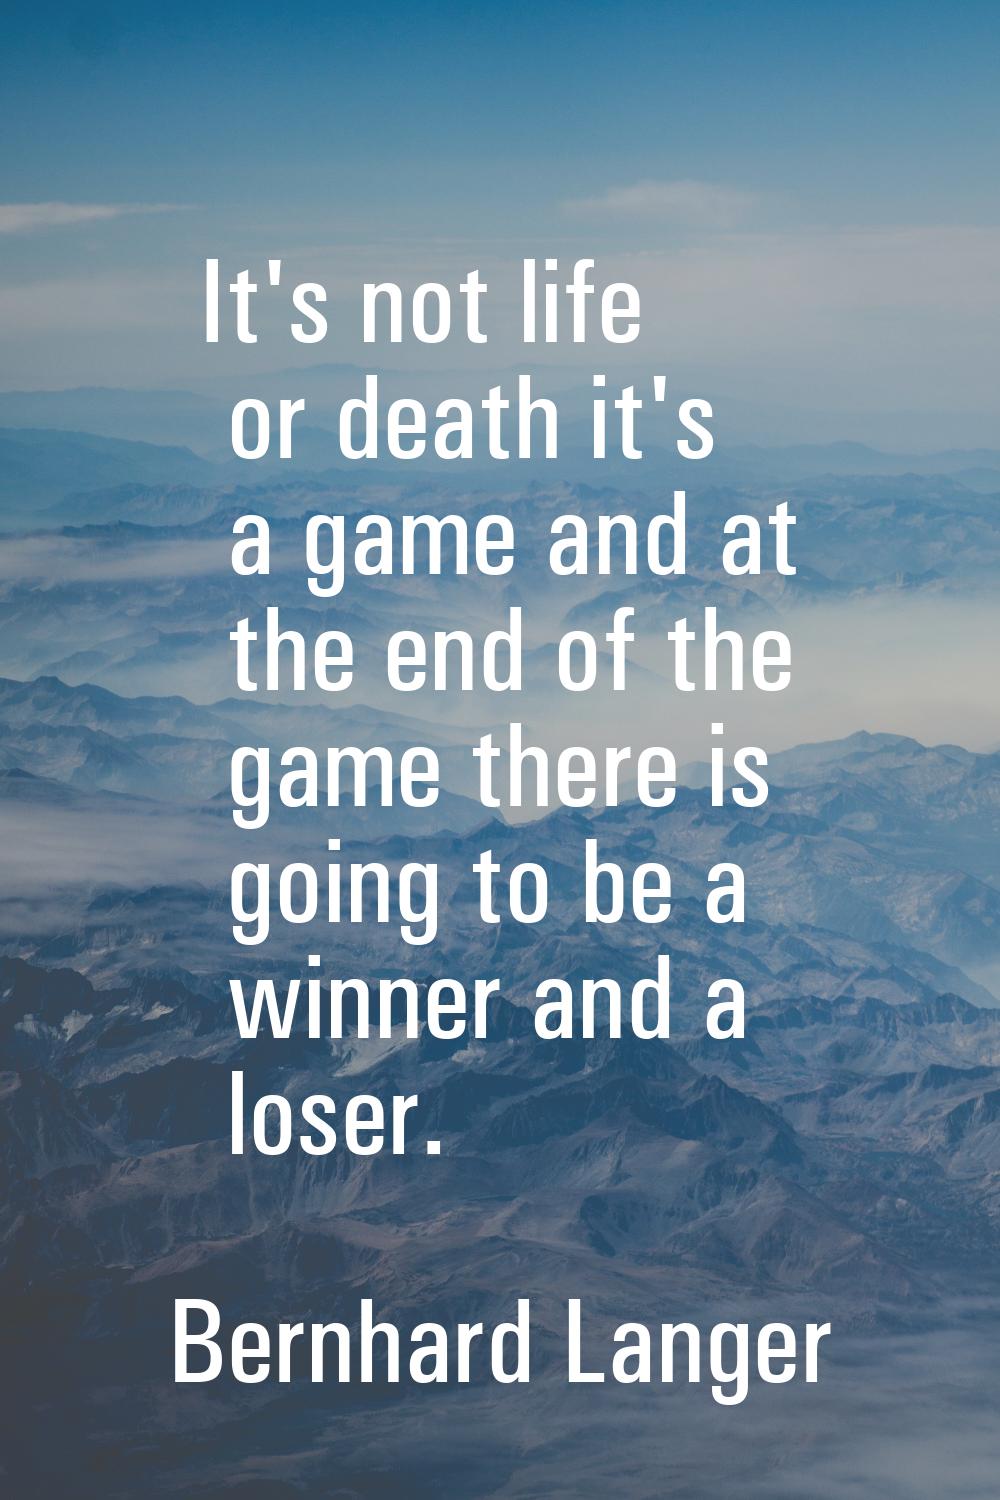 It's not life or death it's a game and at the end of the game there is going to be a winner and a l